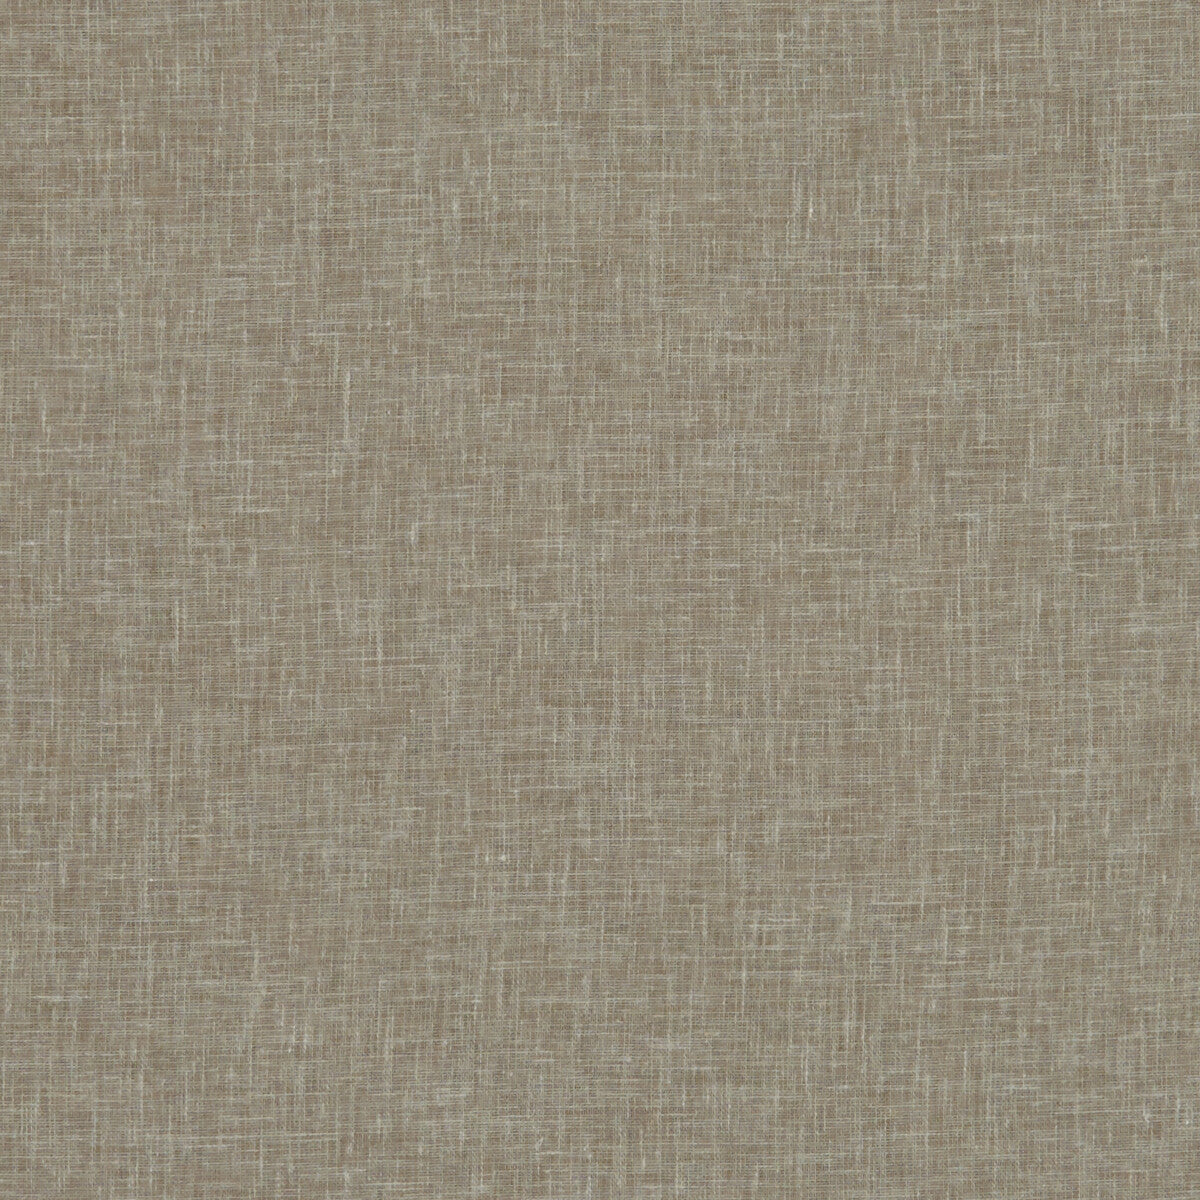 Midori fabric in mocha color - pattern F1068/29.CAC.0 - by Clarke And Clarke in the Clarke &amp; Clarke Midori collection